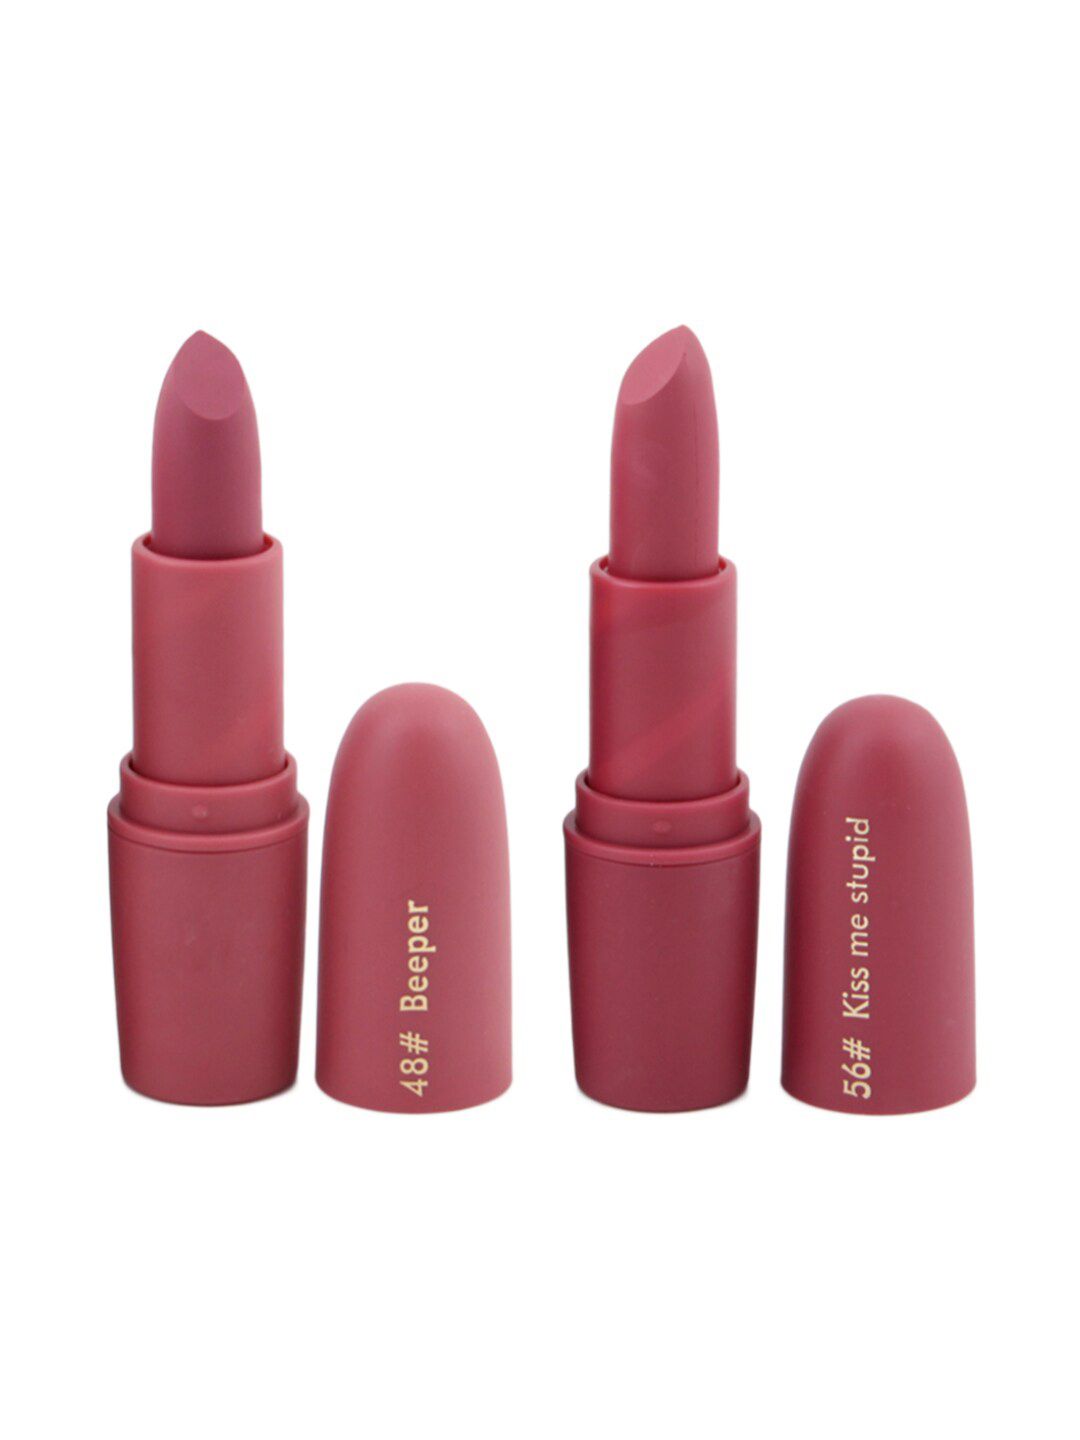 MISS ROSE Professional Make-Up Set of 2 Matte Lipsticks - Beeper 48 & Kiss Me Stupid 56 Price in India